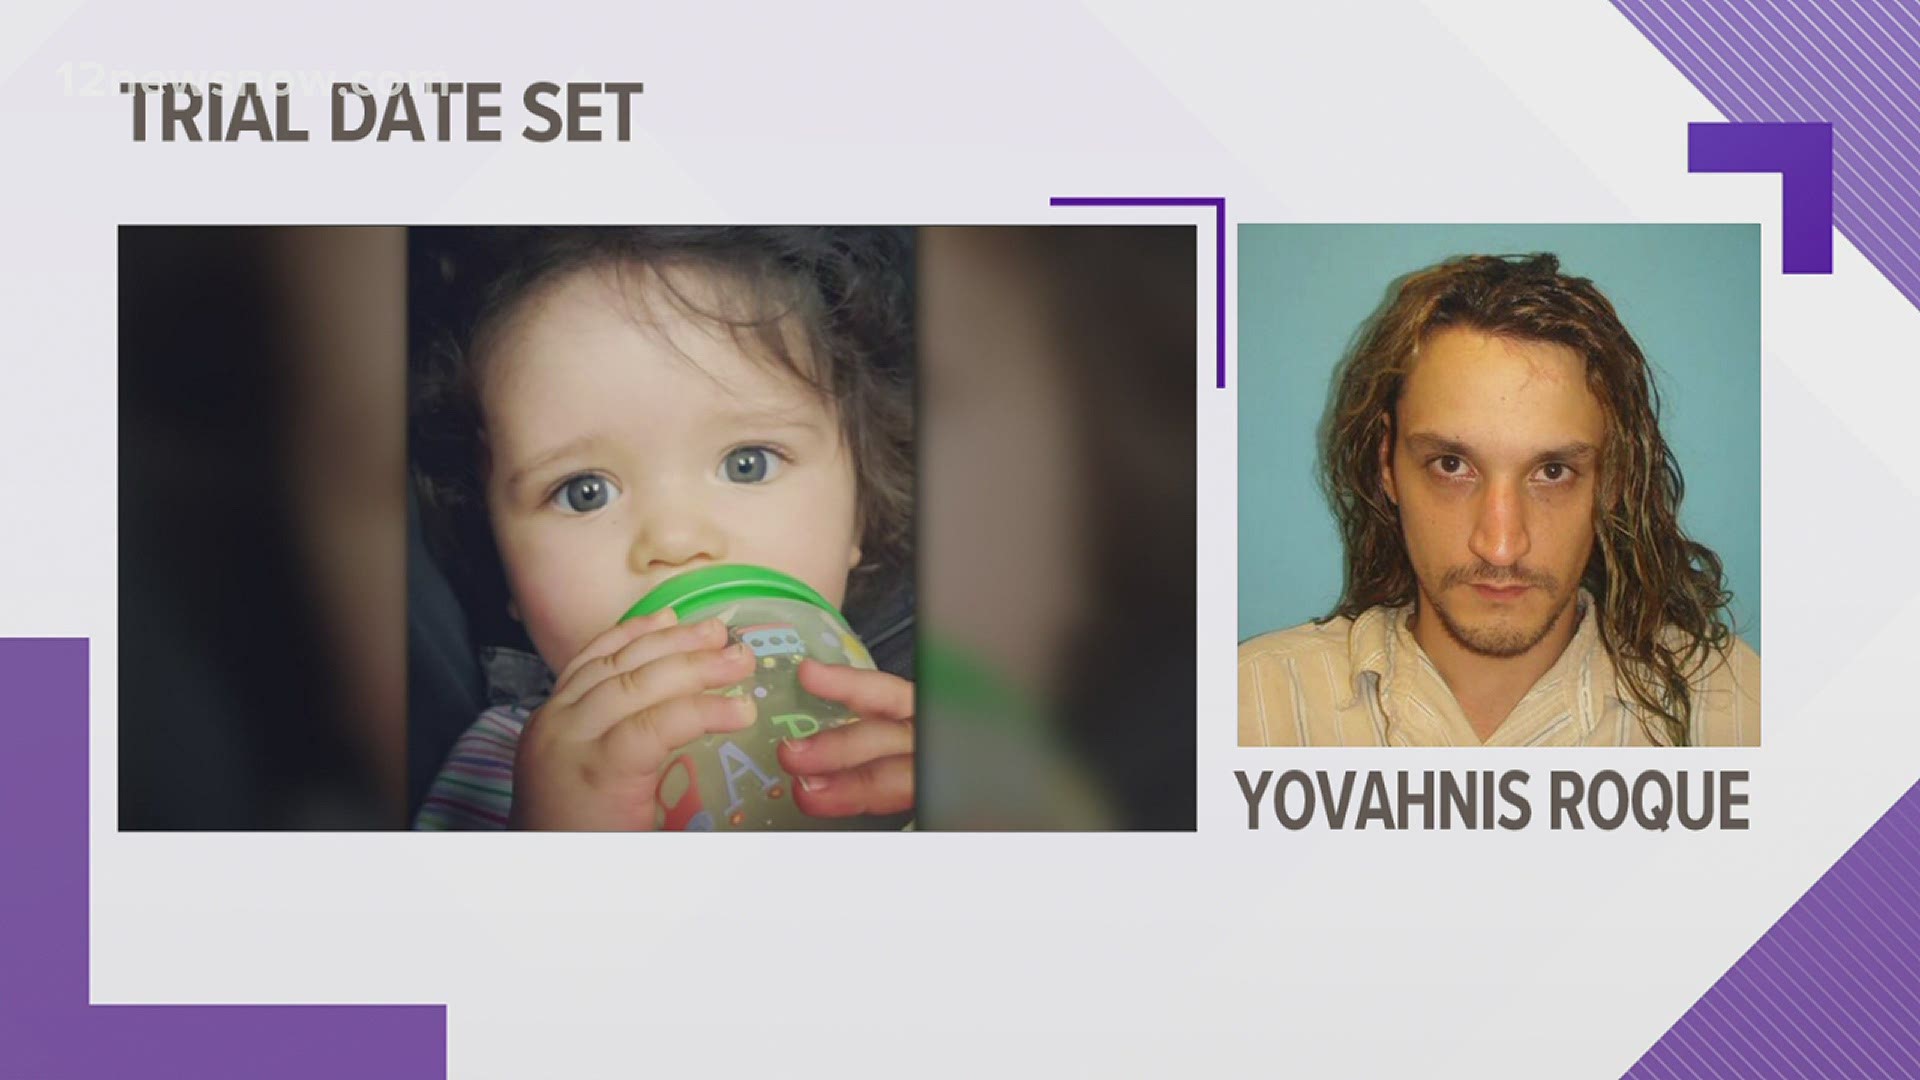 Yovahnis Roque is accused of killing his daughter Savanna Roque on February 29, 2019. His attorney believes he was criminally insane at the time of the crime.